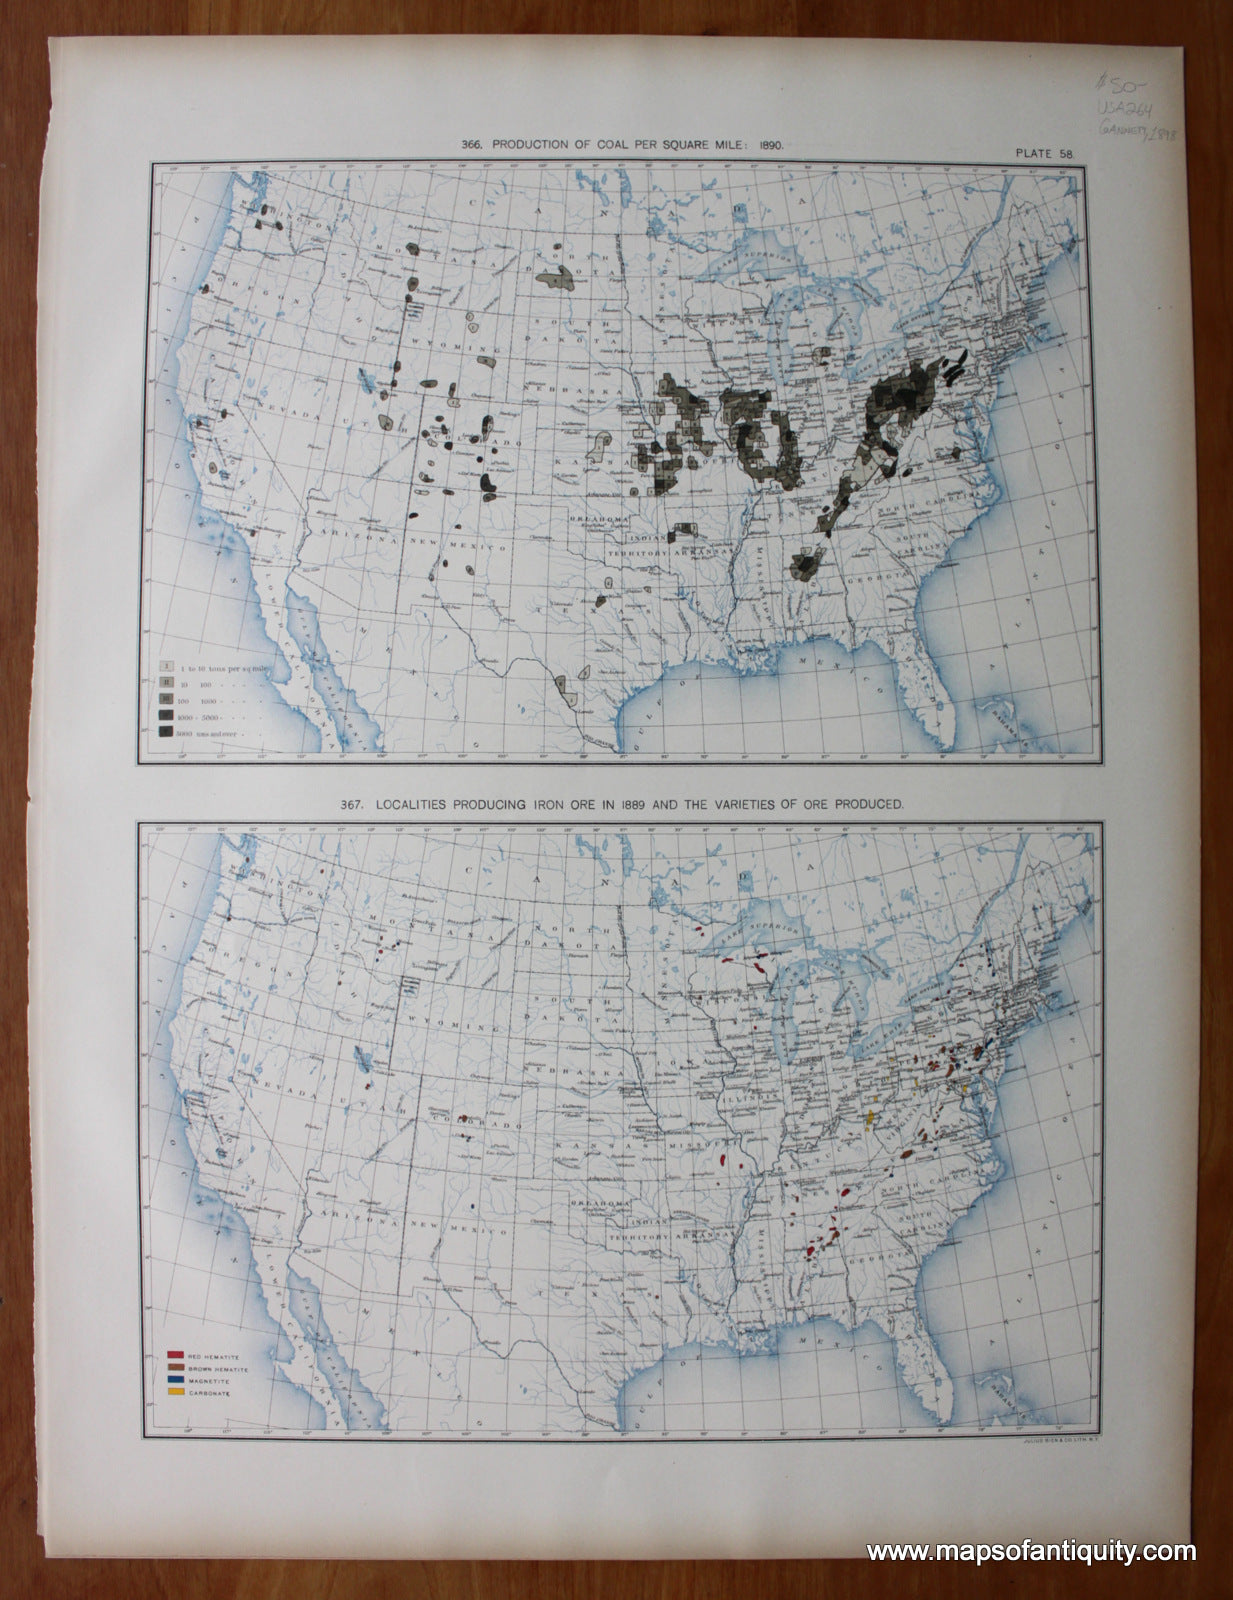 Antique-Printed-Color-Map-Production-of-Coal-Per-Square-Mile:-1890/-Localities-Producing-Iron-Ore-in-1889-And-The-Varieties-of-Ore-Produced-United-States-United-States-General-1898-Gannett-Maps-Of-Antiquity